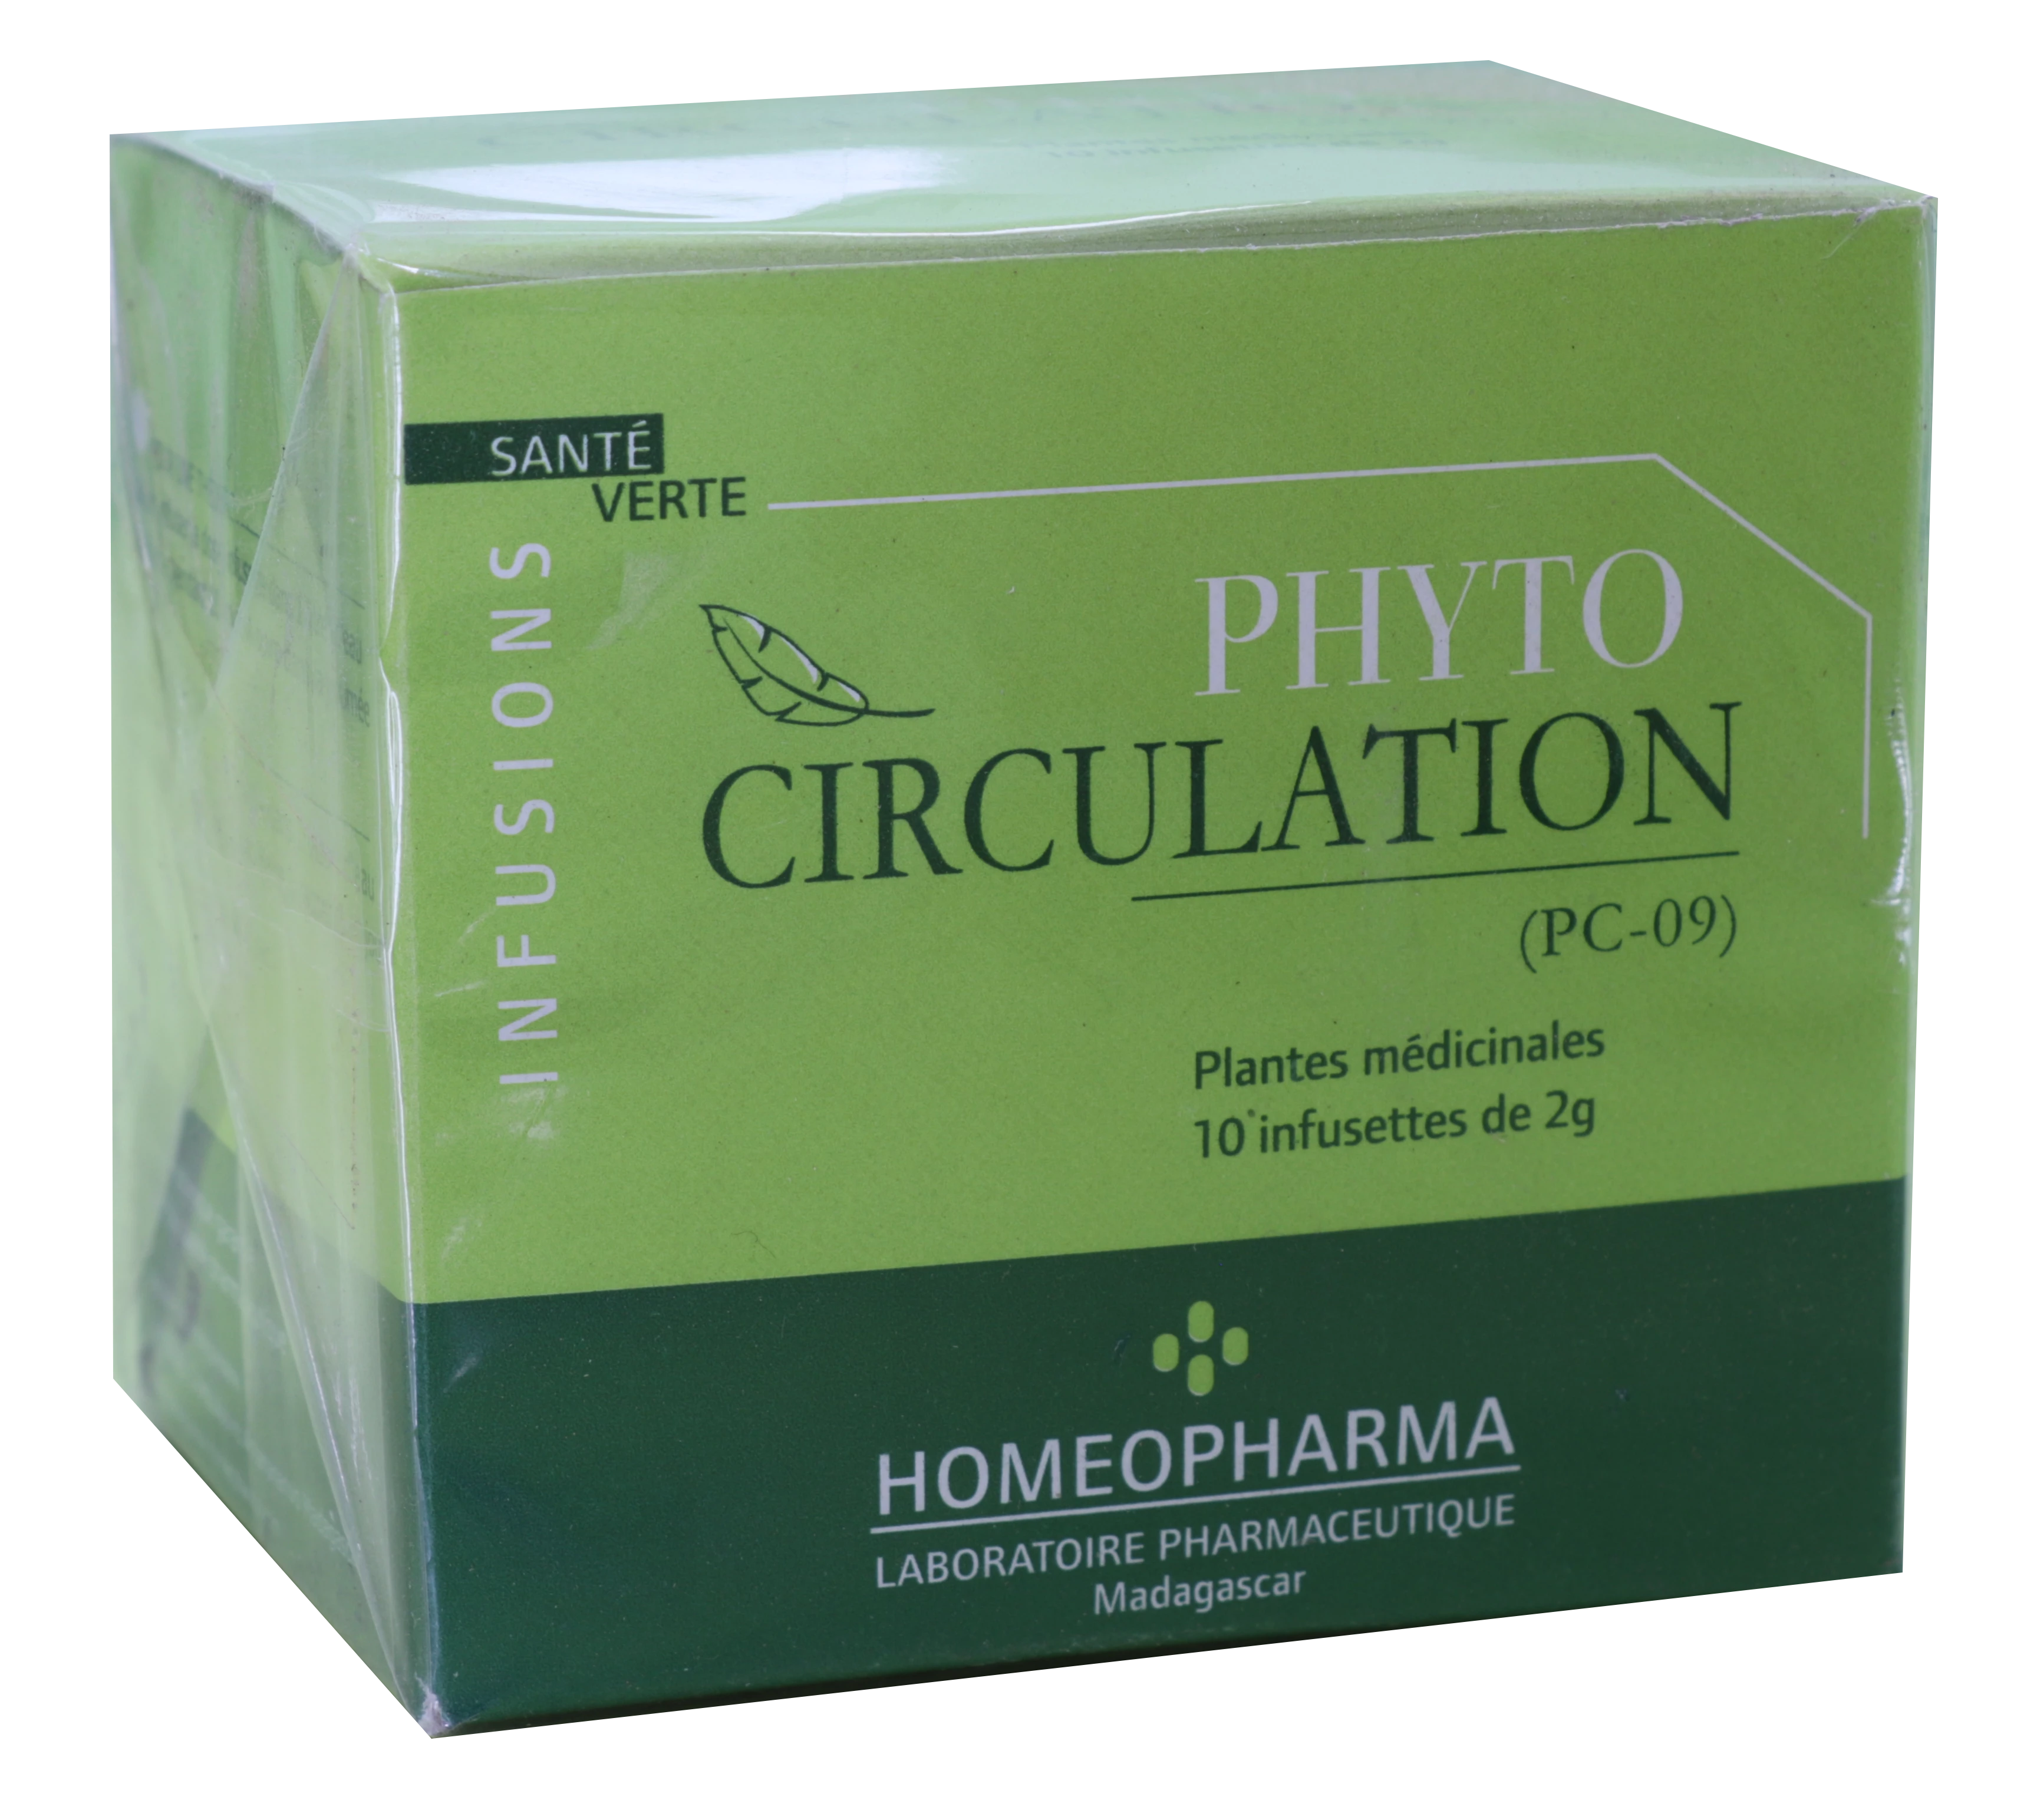 Phytotherapie Traditionnelle Pc09-phyto-circulation Bte 20 Infusiones - HOMEOPHARMA